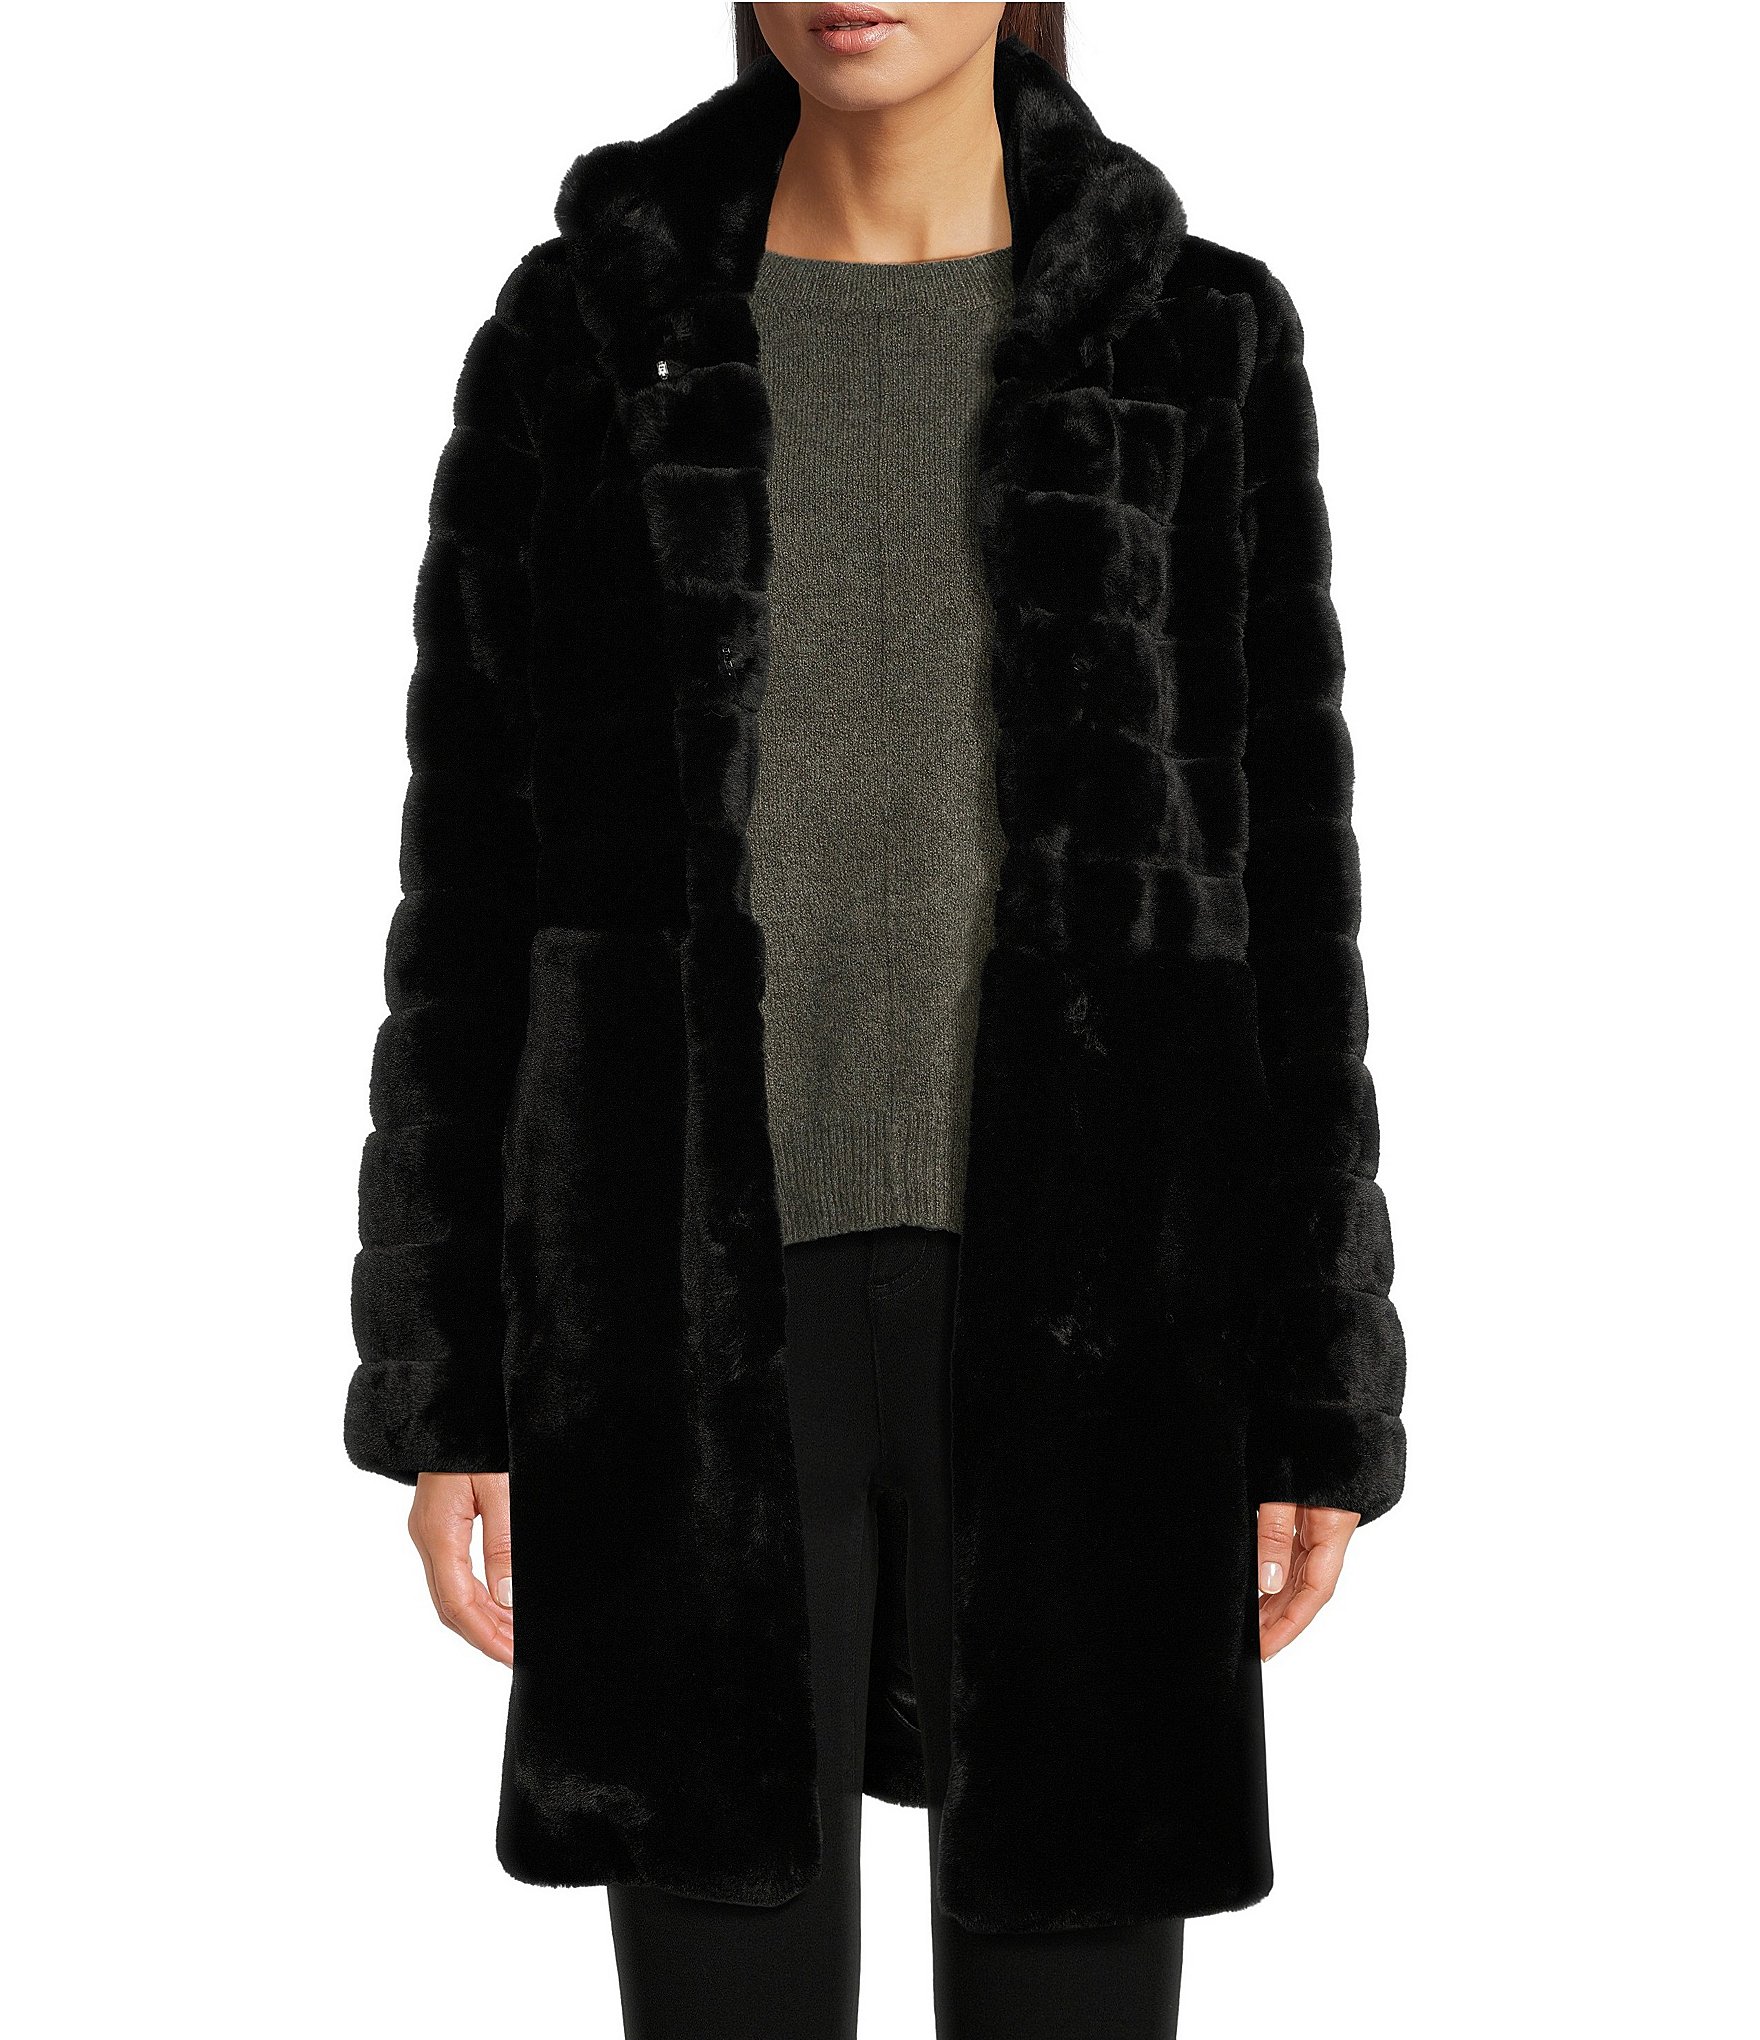 Vince Camuto Grooved Faux Fur Single Breasted Stand Collar Coat | Dillard's